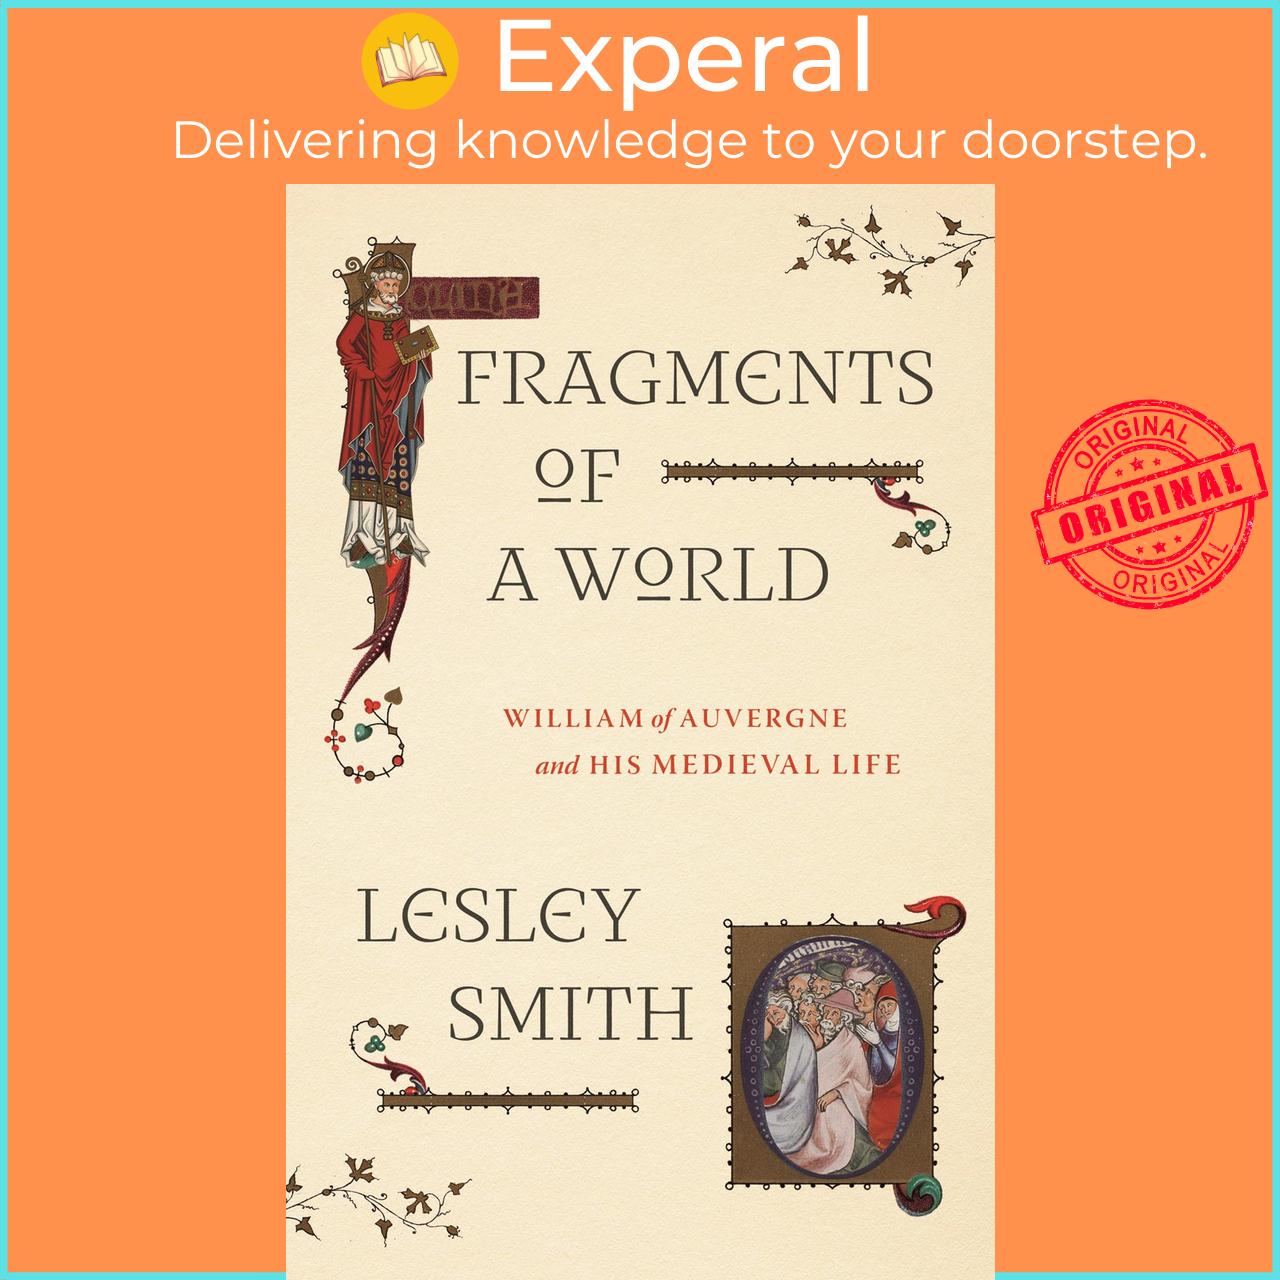 Sách - Fragments of a World - William of Auvergne and His Meval Life by Lesley Smith (UK edition, Hardcover)